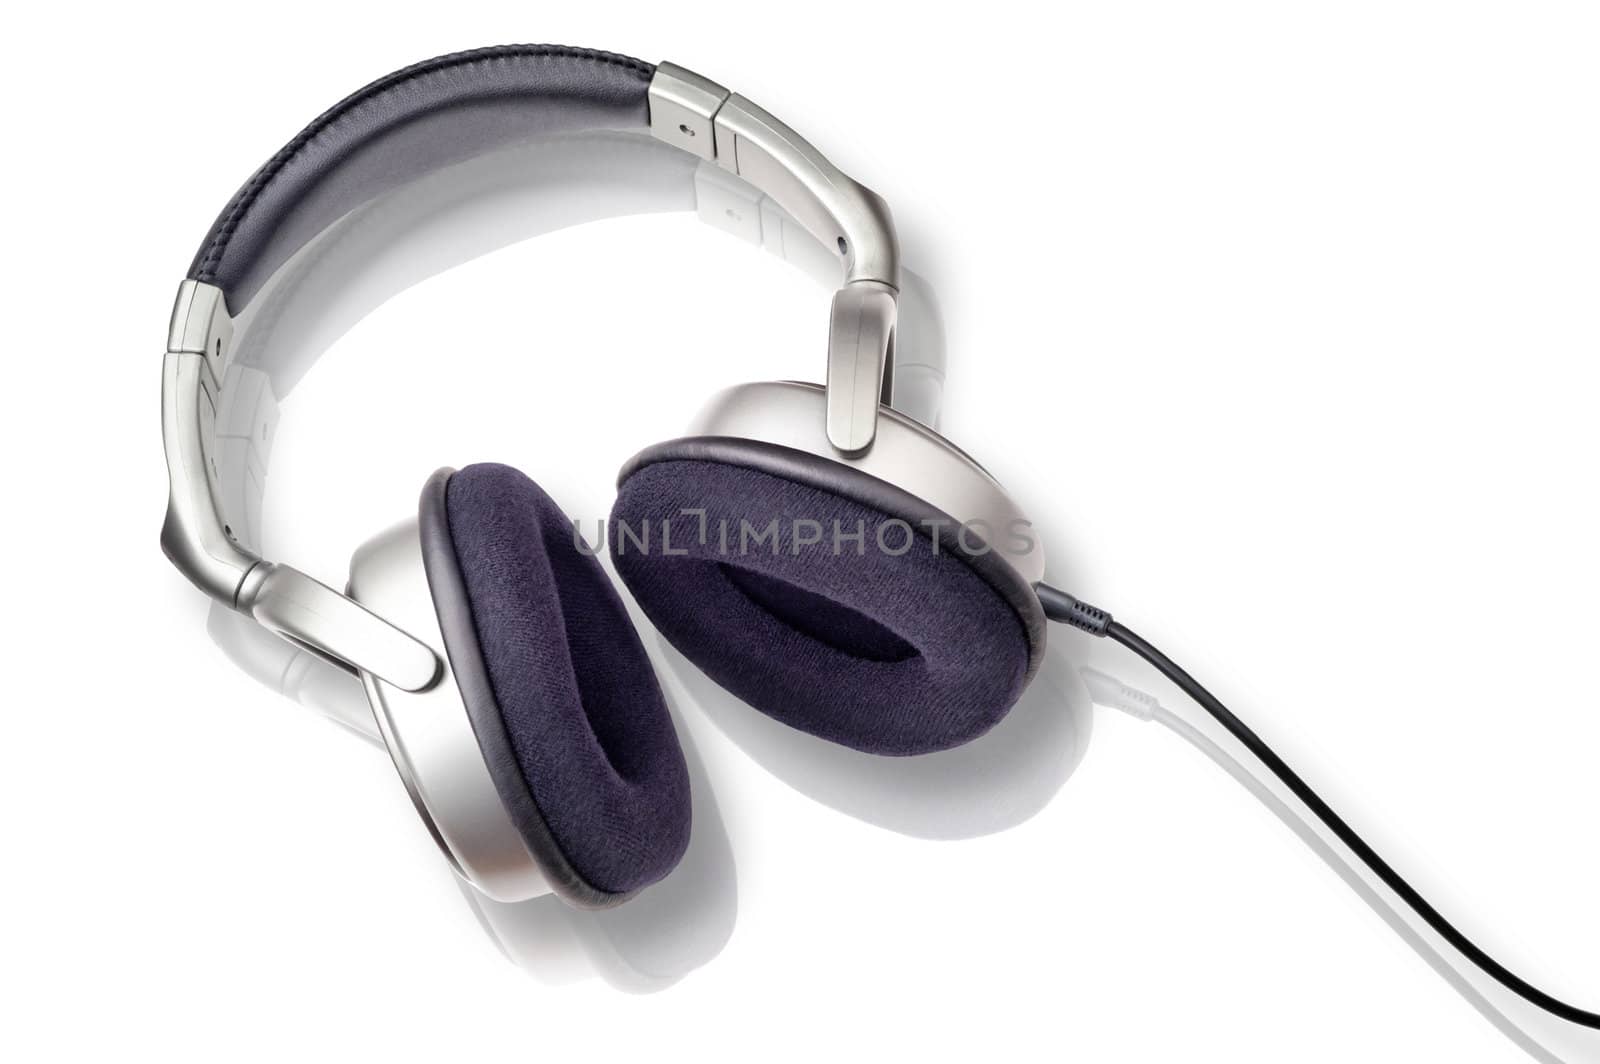 Earphones with clipping path by Laborer